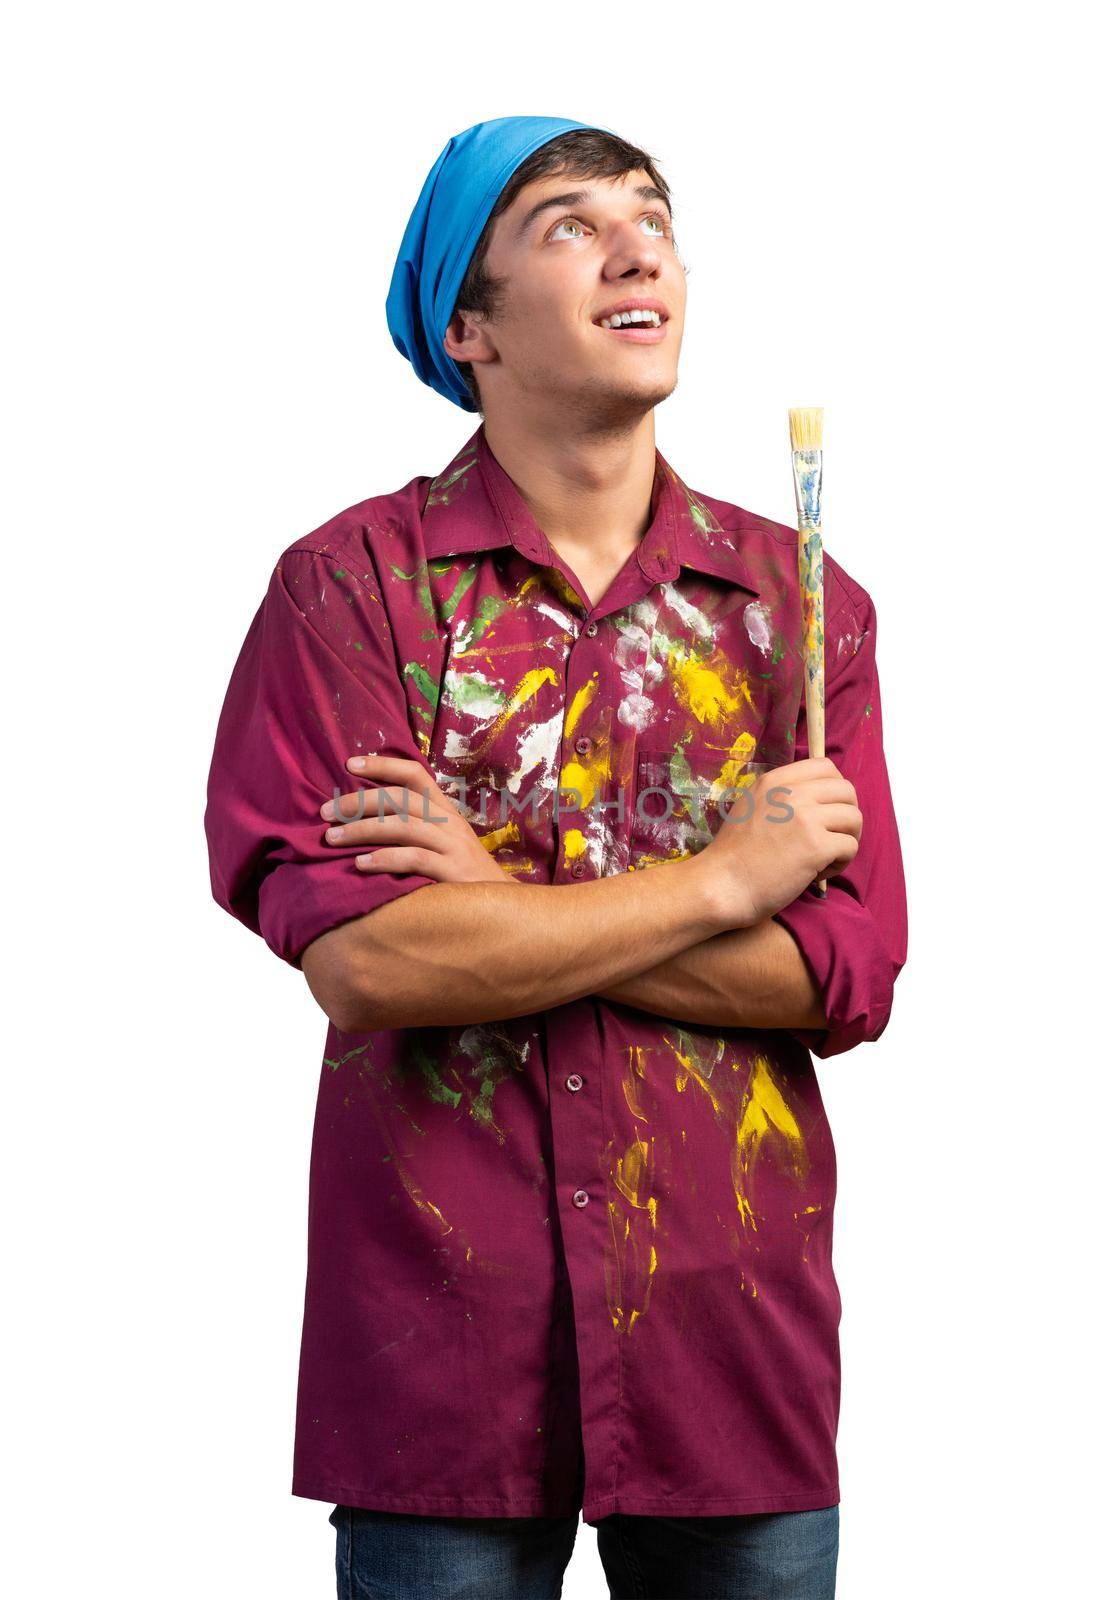 Smiling young painter artist holding paintbrush. Portrait of happy painter looking upwards isolated on white background. Creative hobby and artistic occupation. Art school student posing.